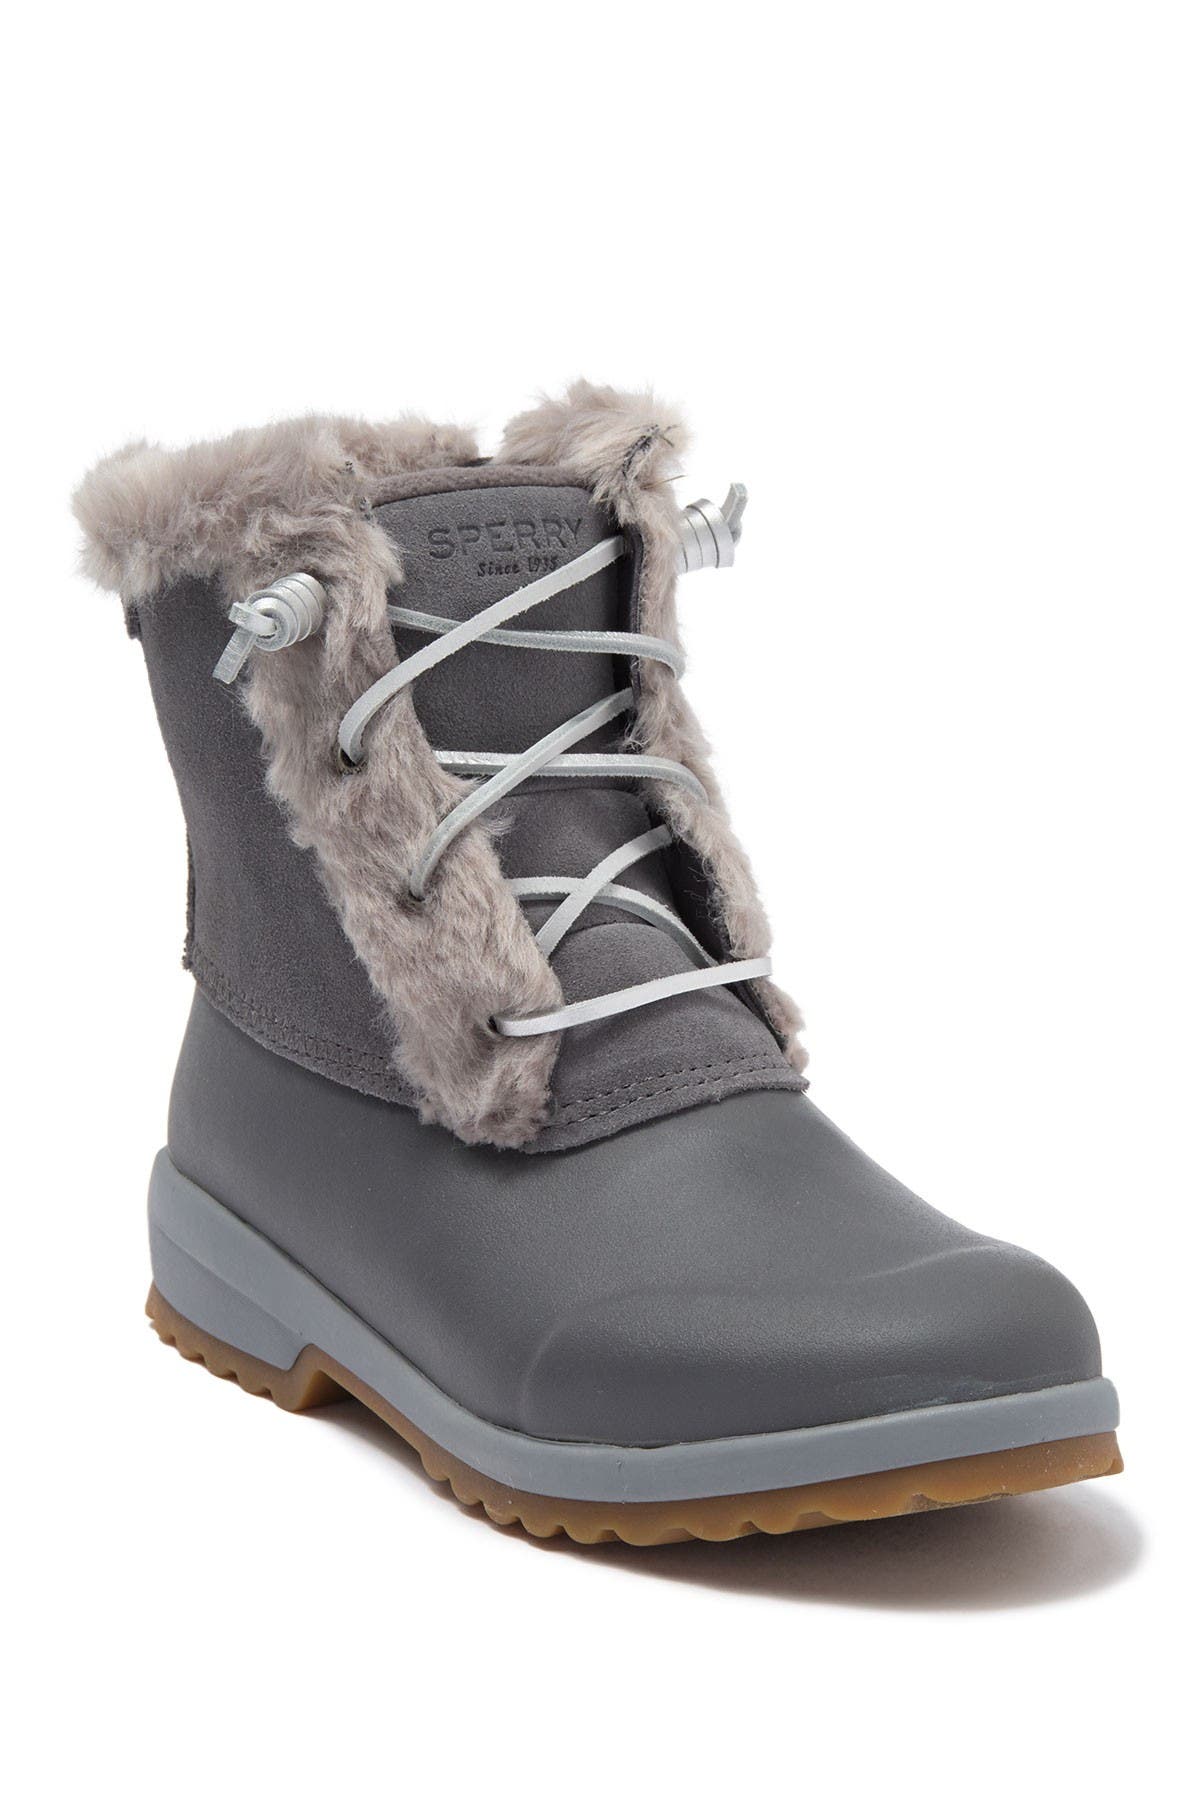 sperry fur lined boots